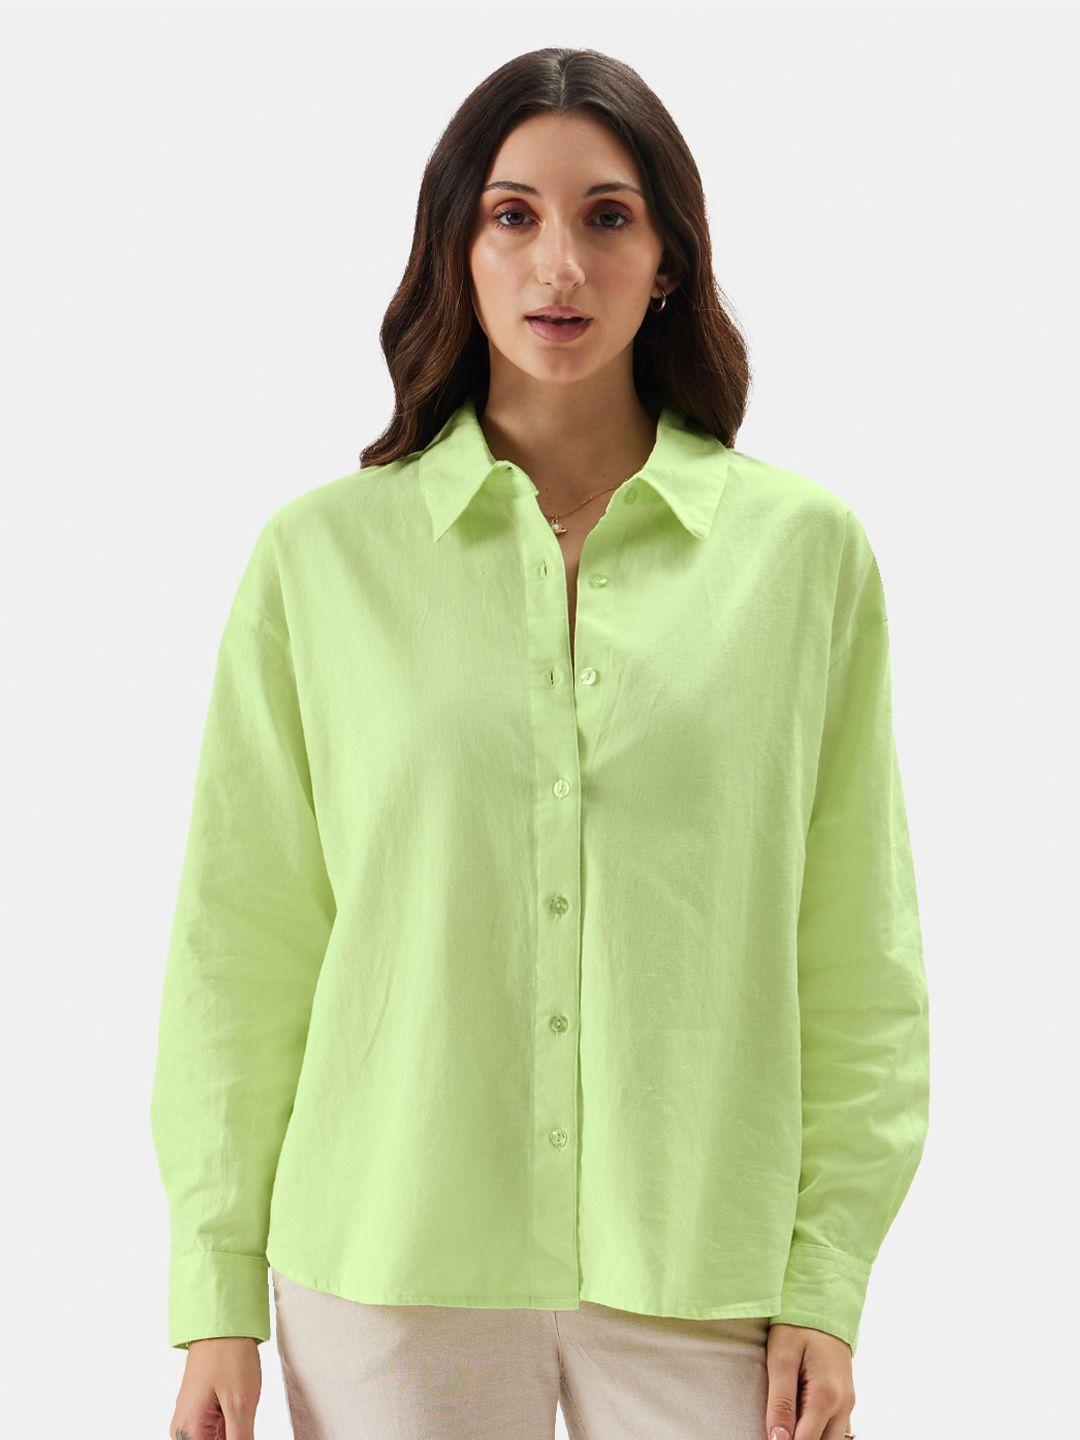 The Souled Store Lime Green Relaxed Fit Cotton Linen Casual Shirt